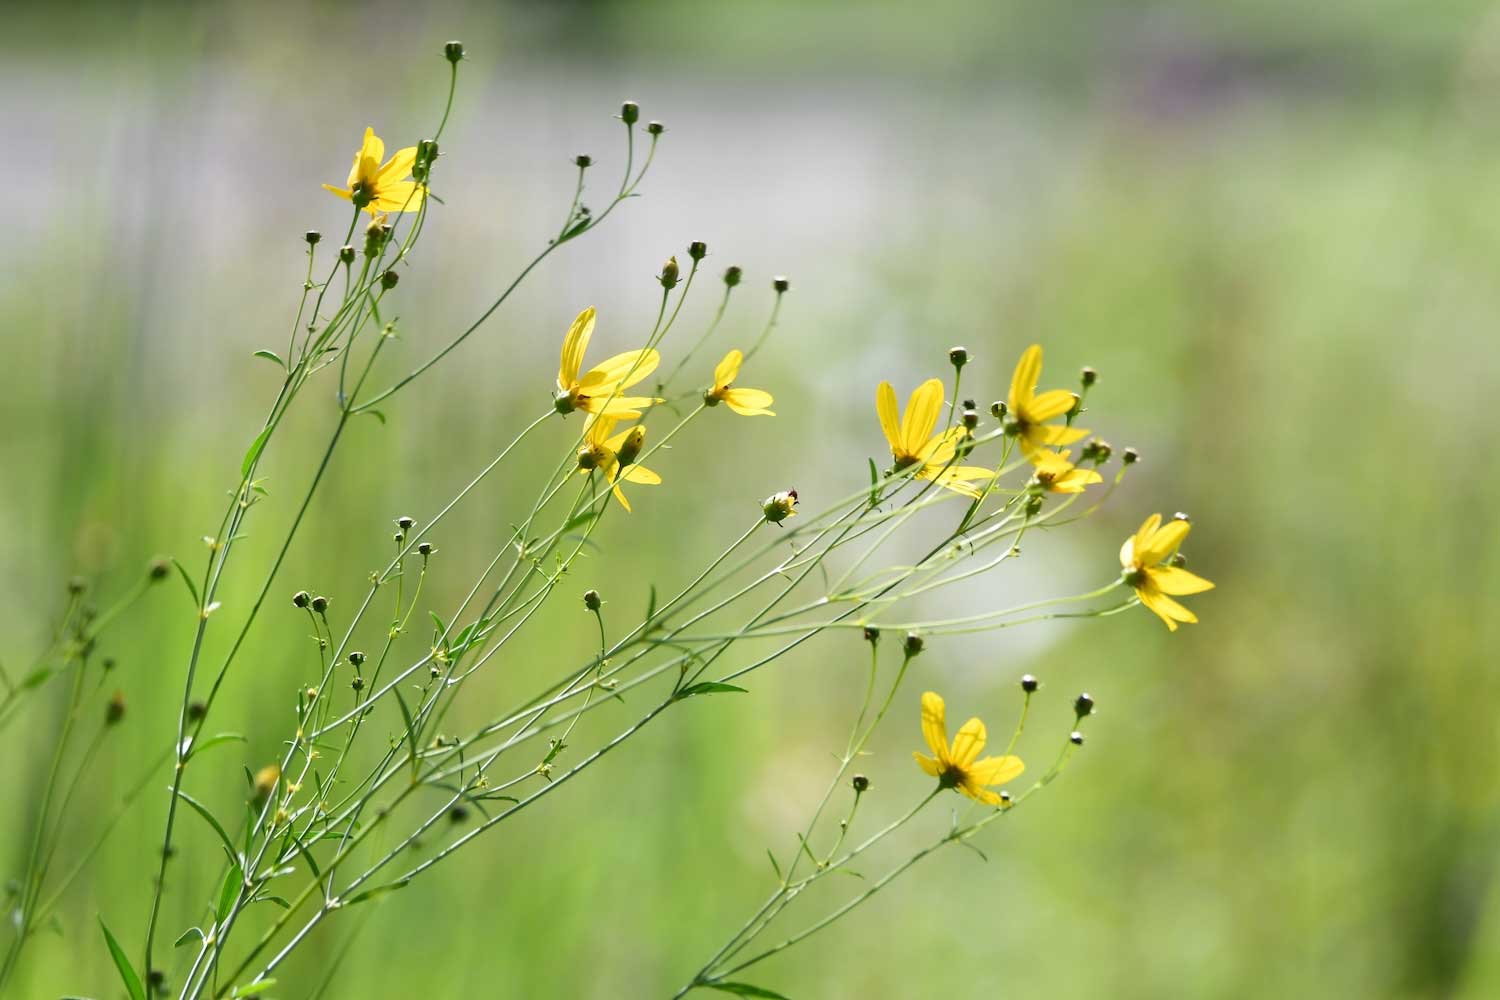 Yellow coreopsis flowers swaying in the breeze.